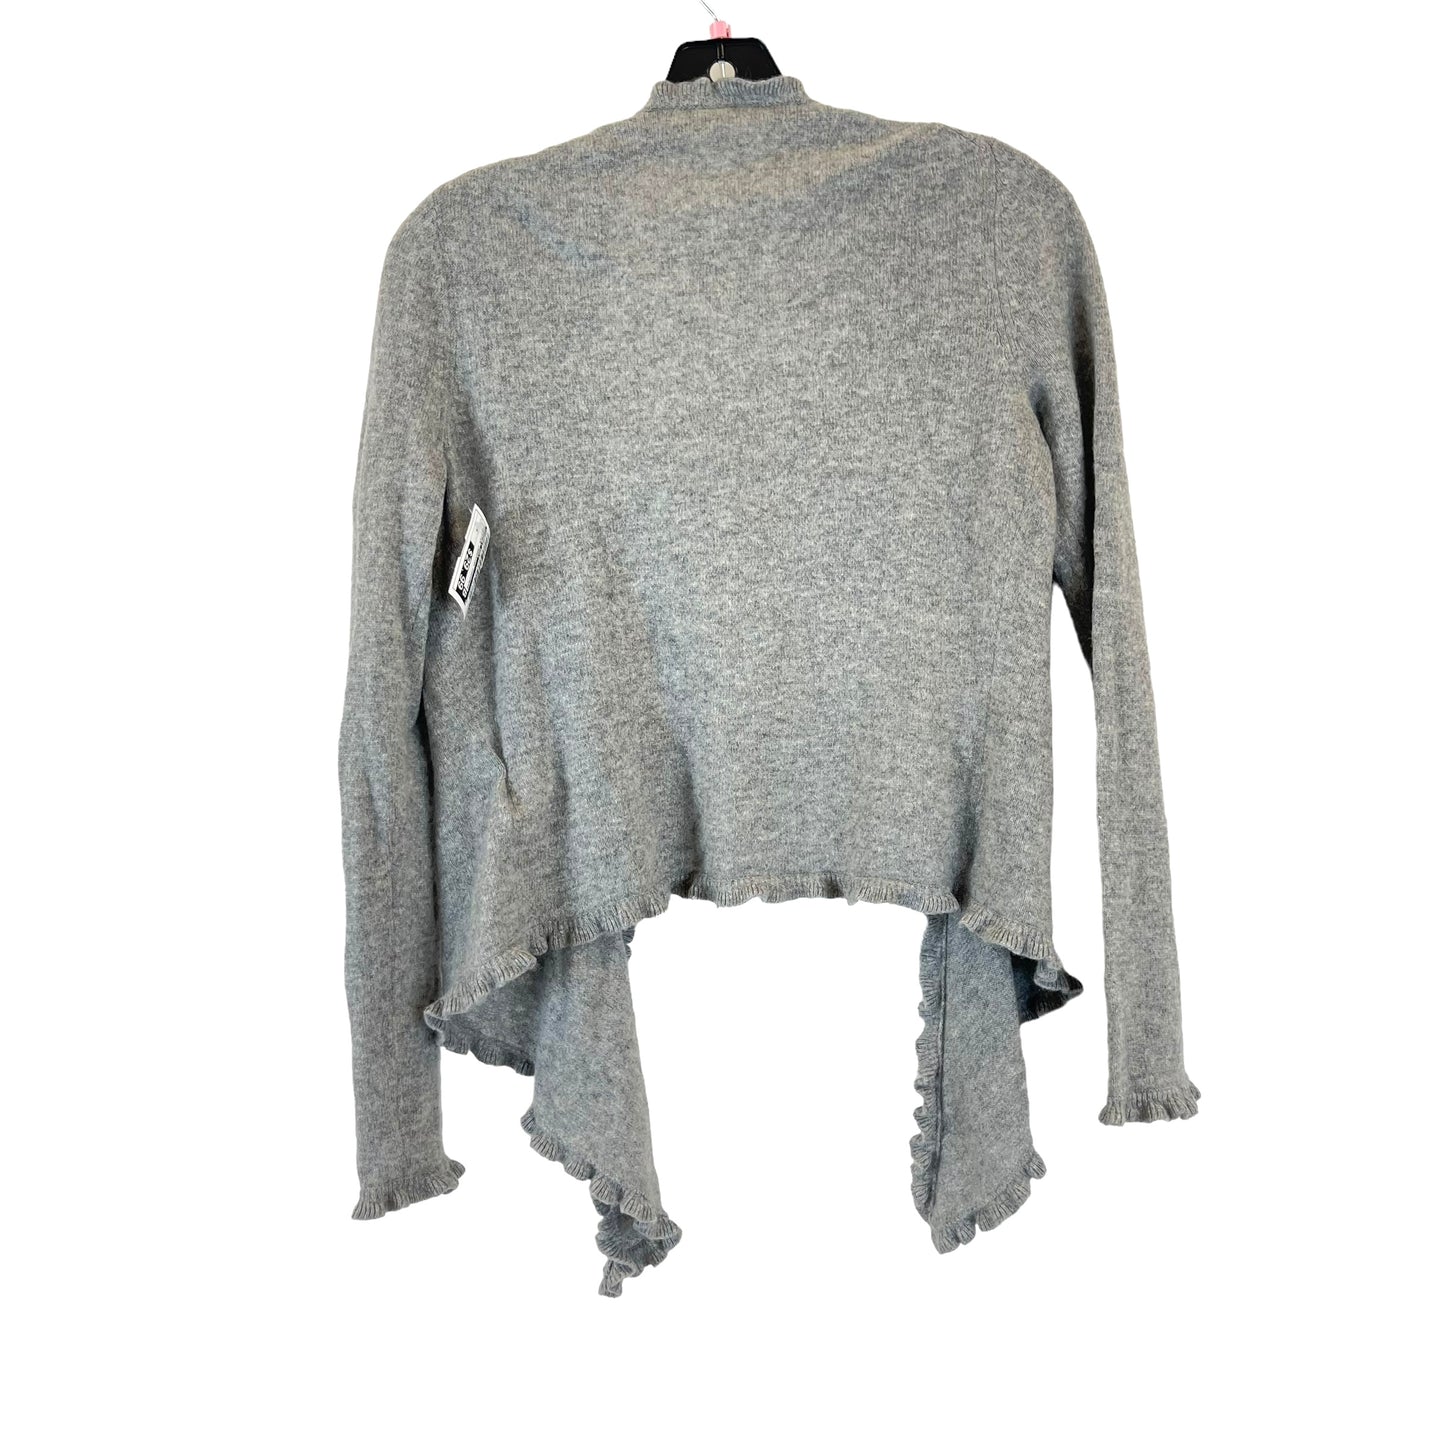 Sweater Cardigan Cashmere By Garnet Hill  Size: Xs